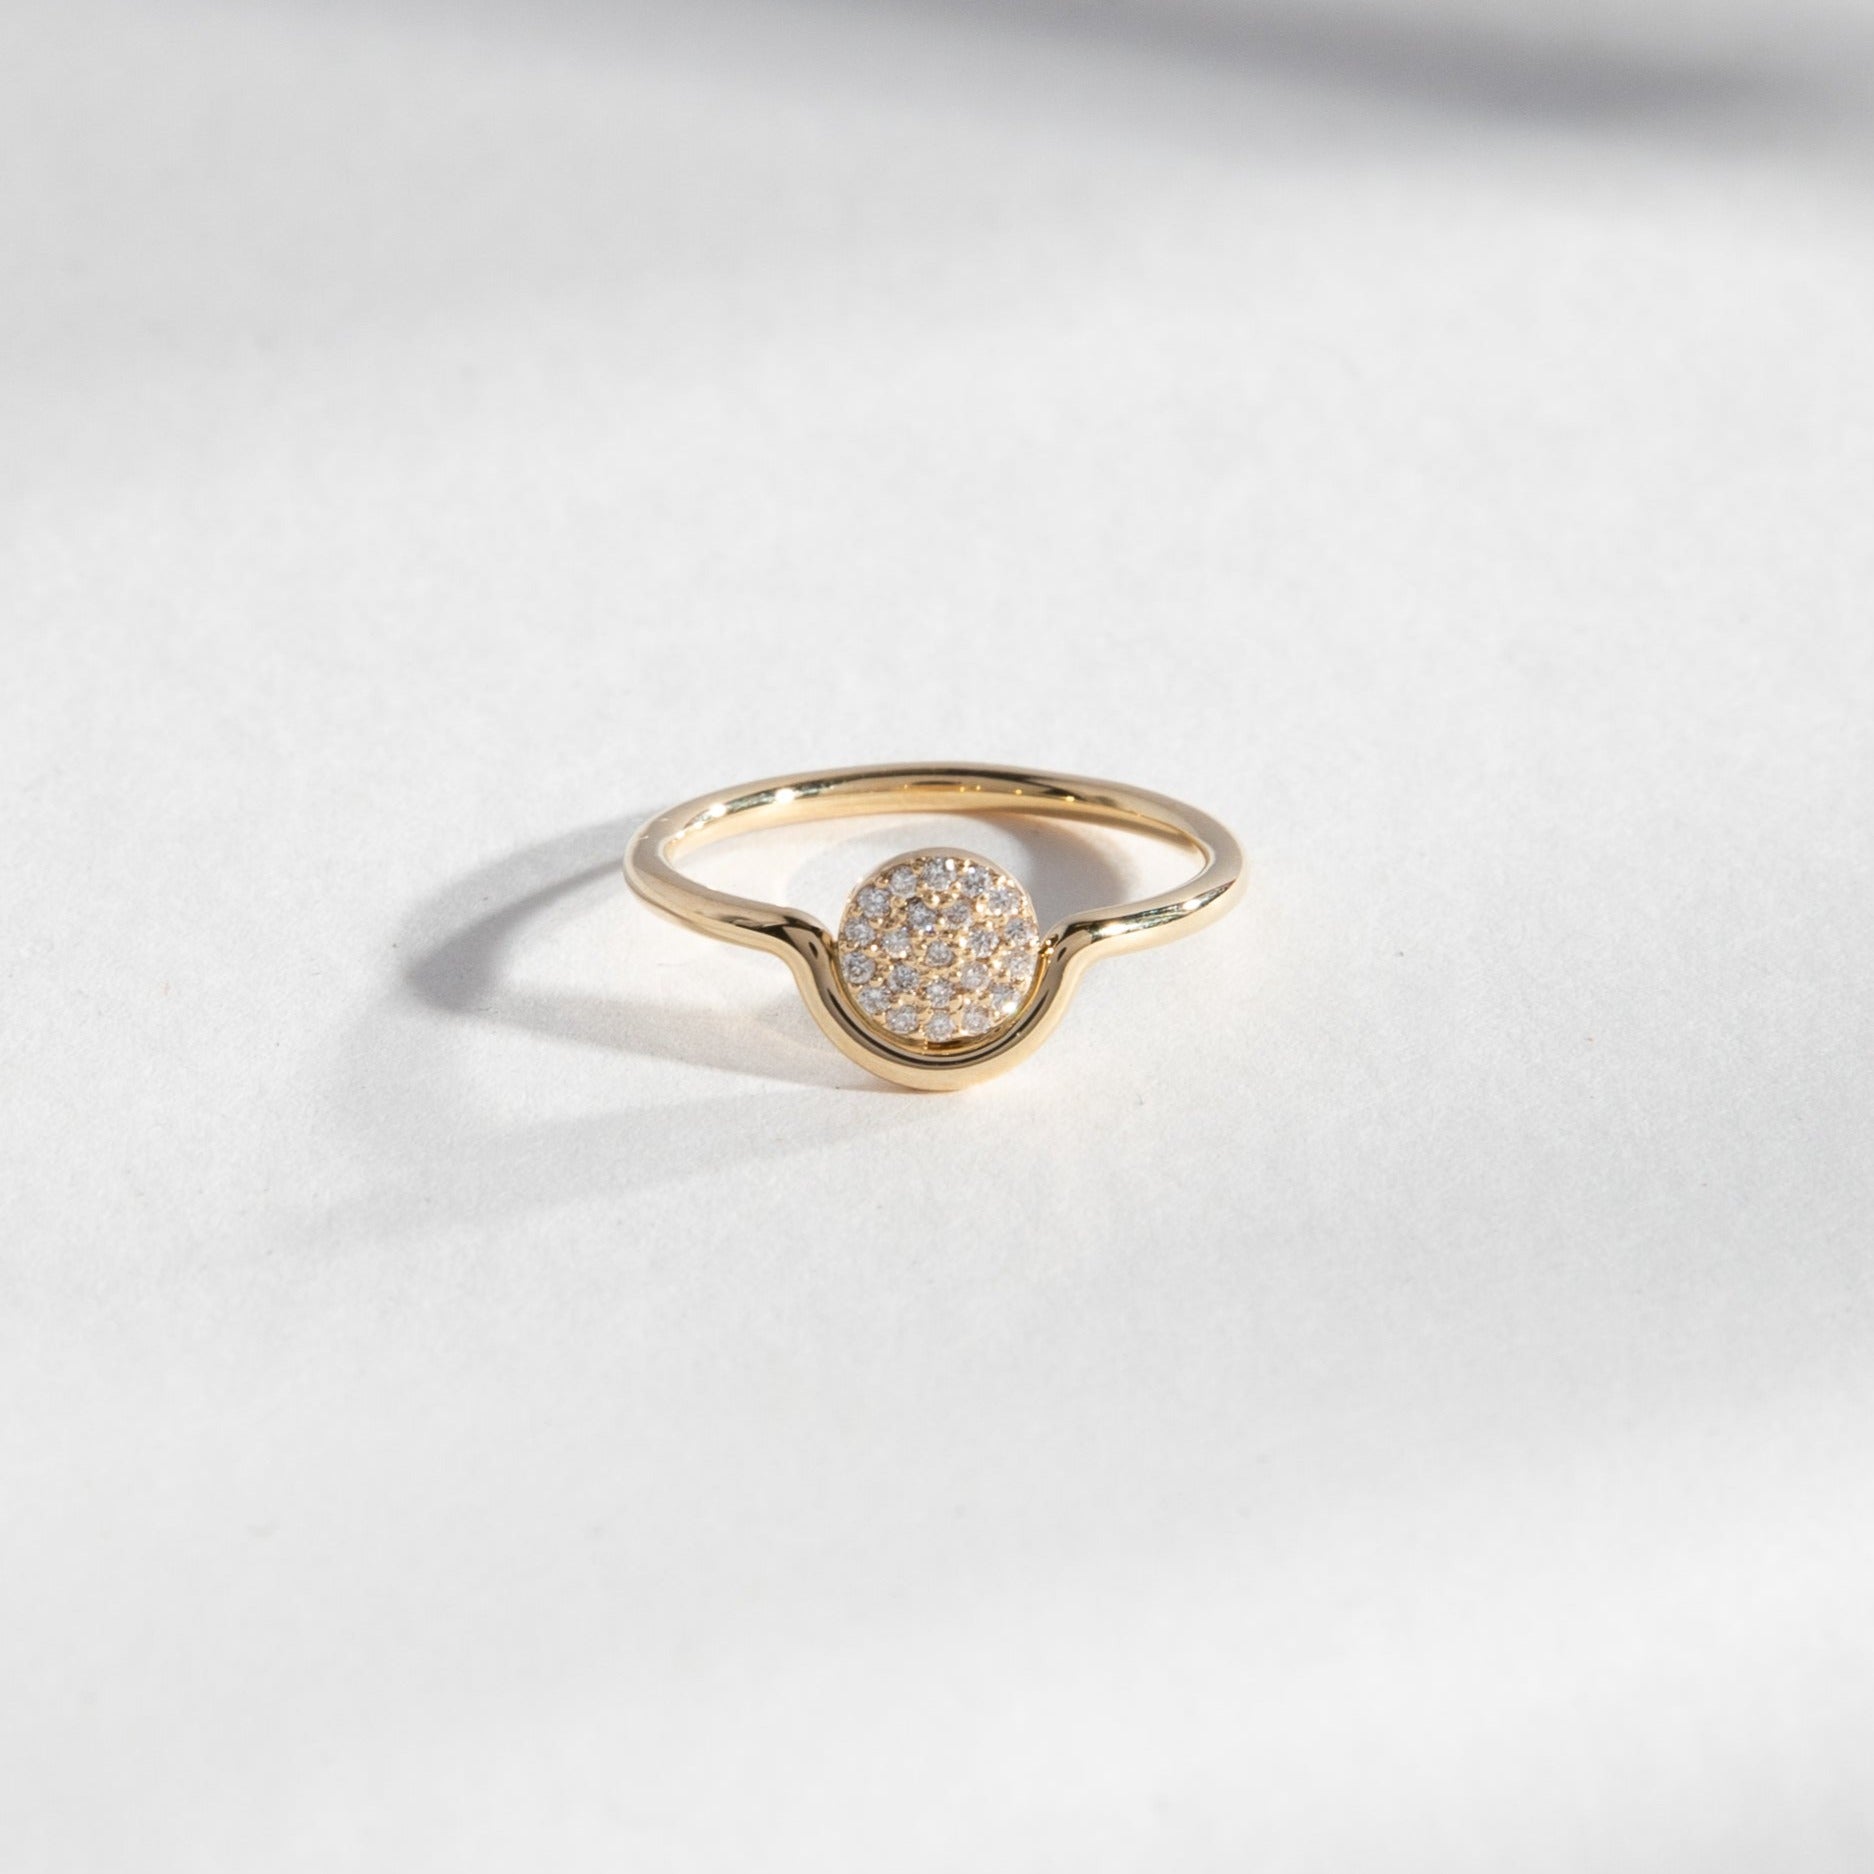 Bodu Unique Ring in 14k Gold set with lab-grown diamonds By SHW Fine Jewelry NYC